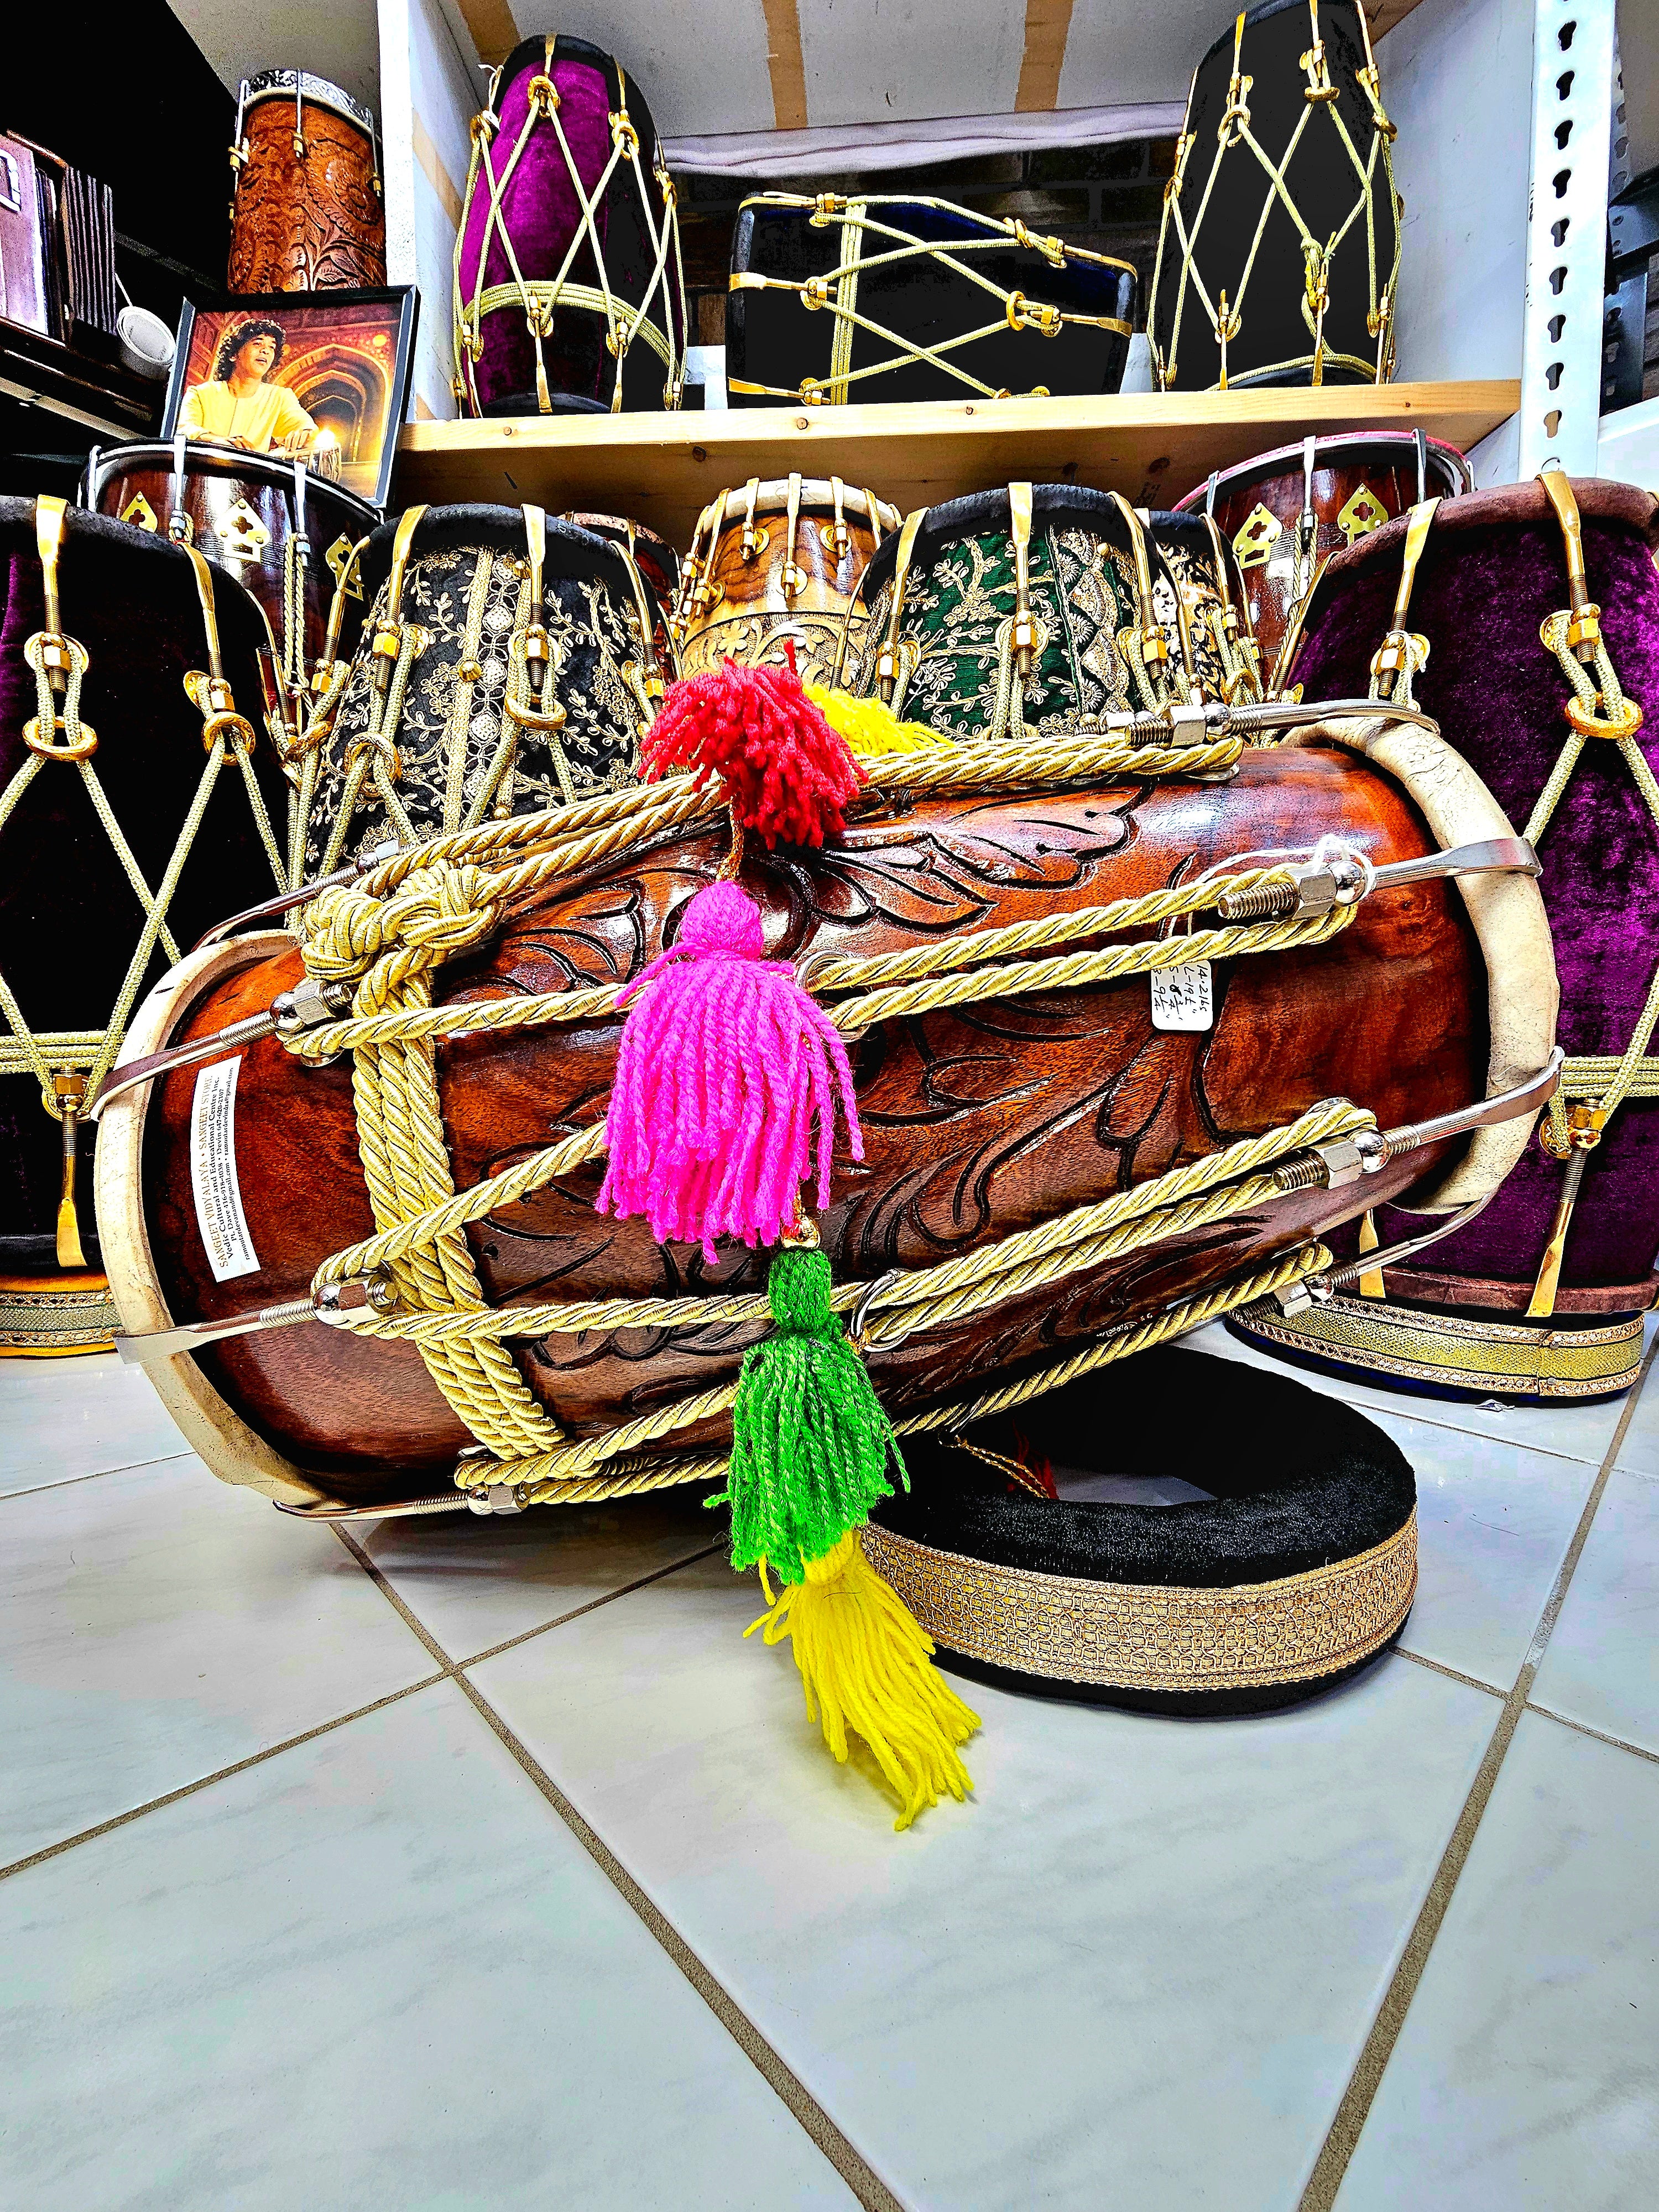 Regal Resonance: Encarved Red Sheesham Dholak with Chrome Bolts, Golden Ropes Design, and Multicolored Tassels